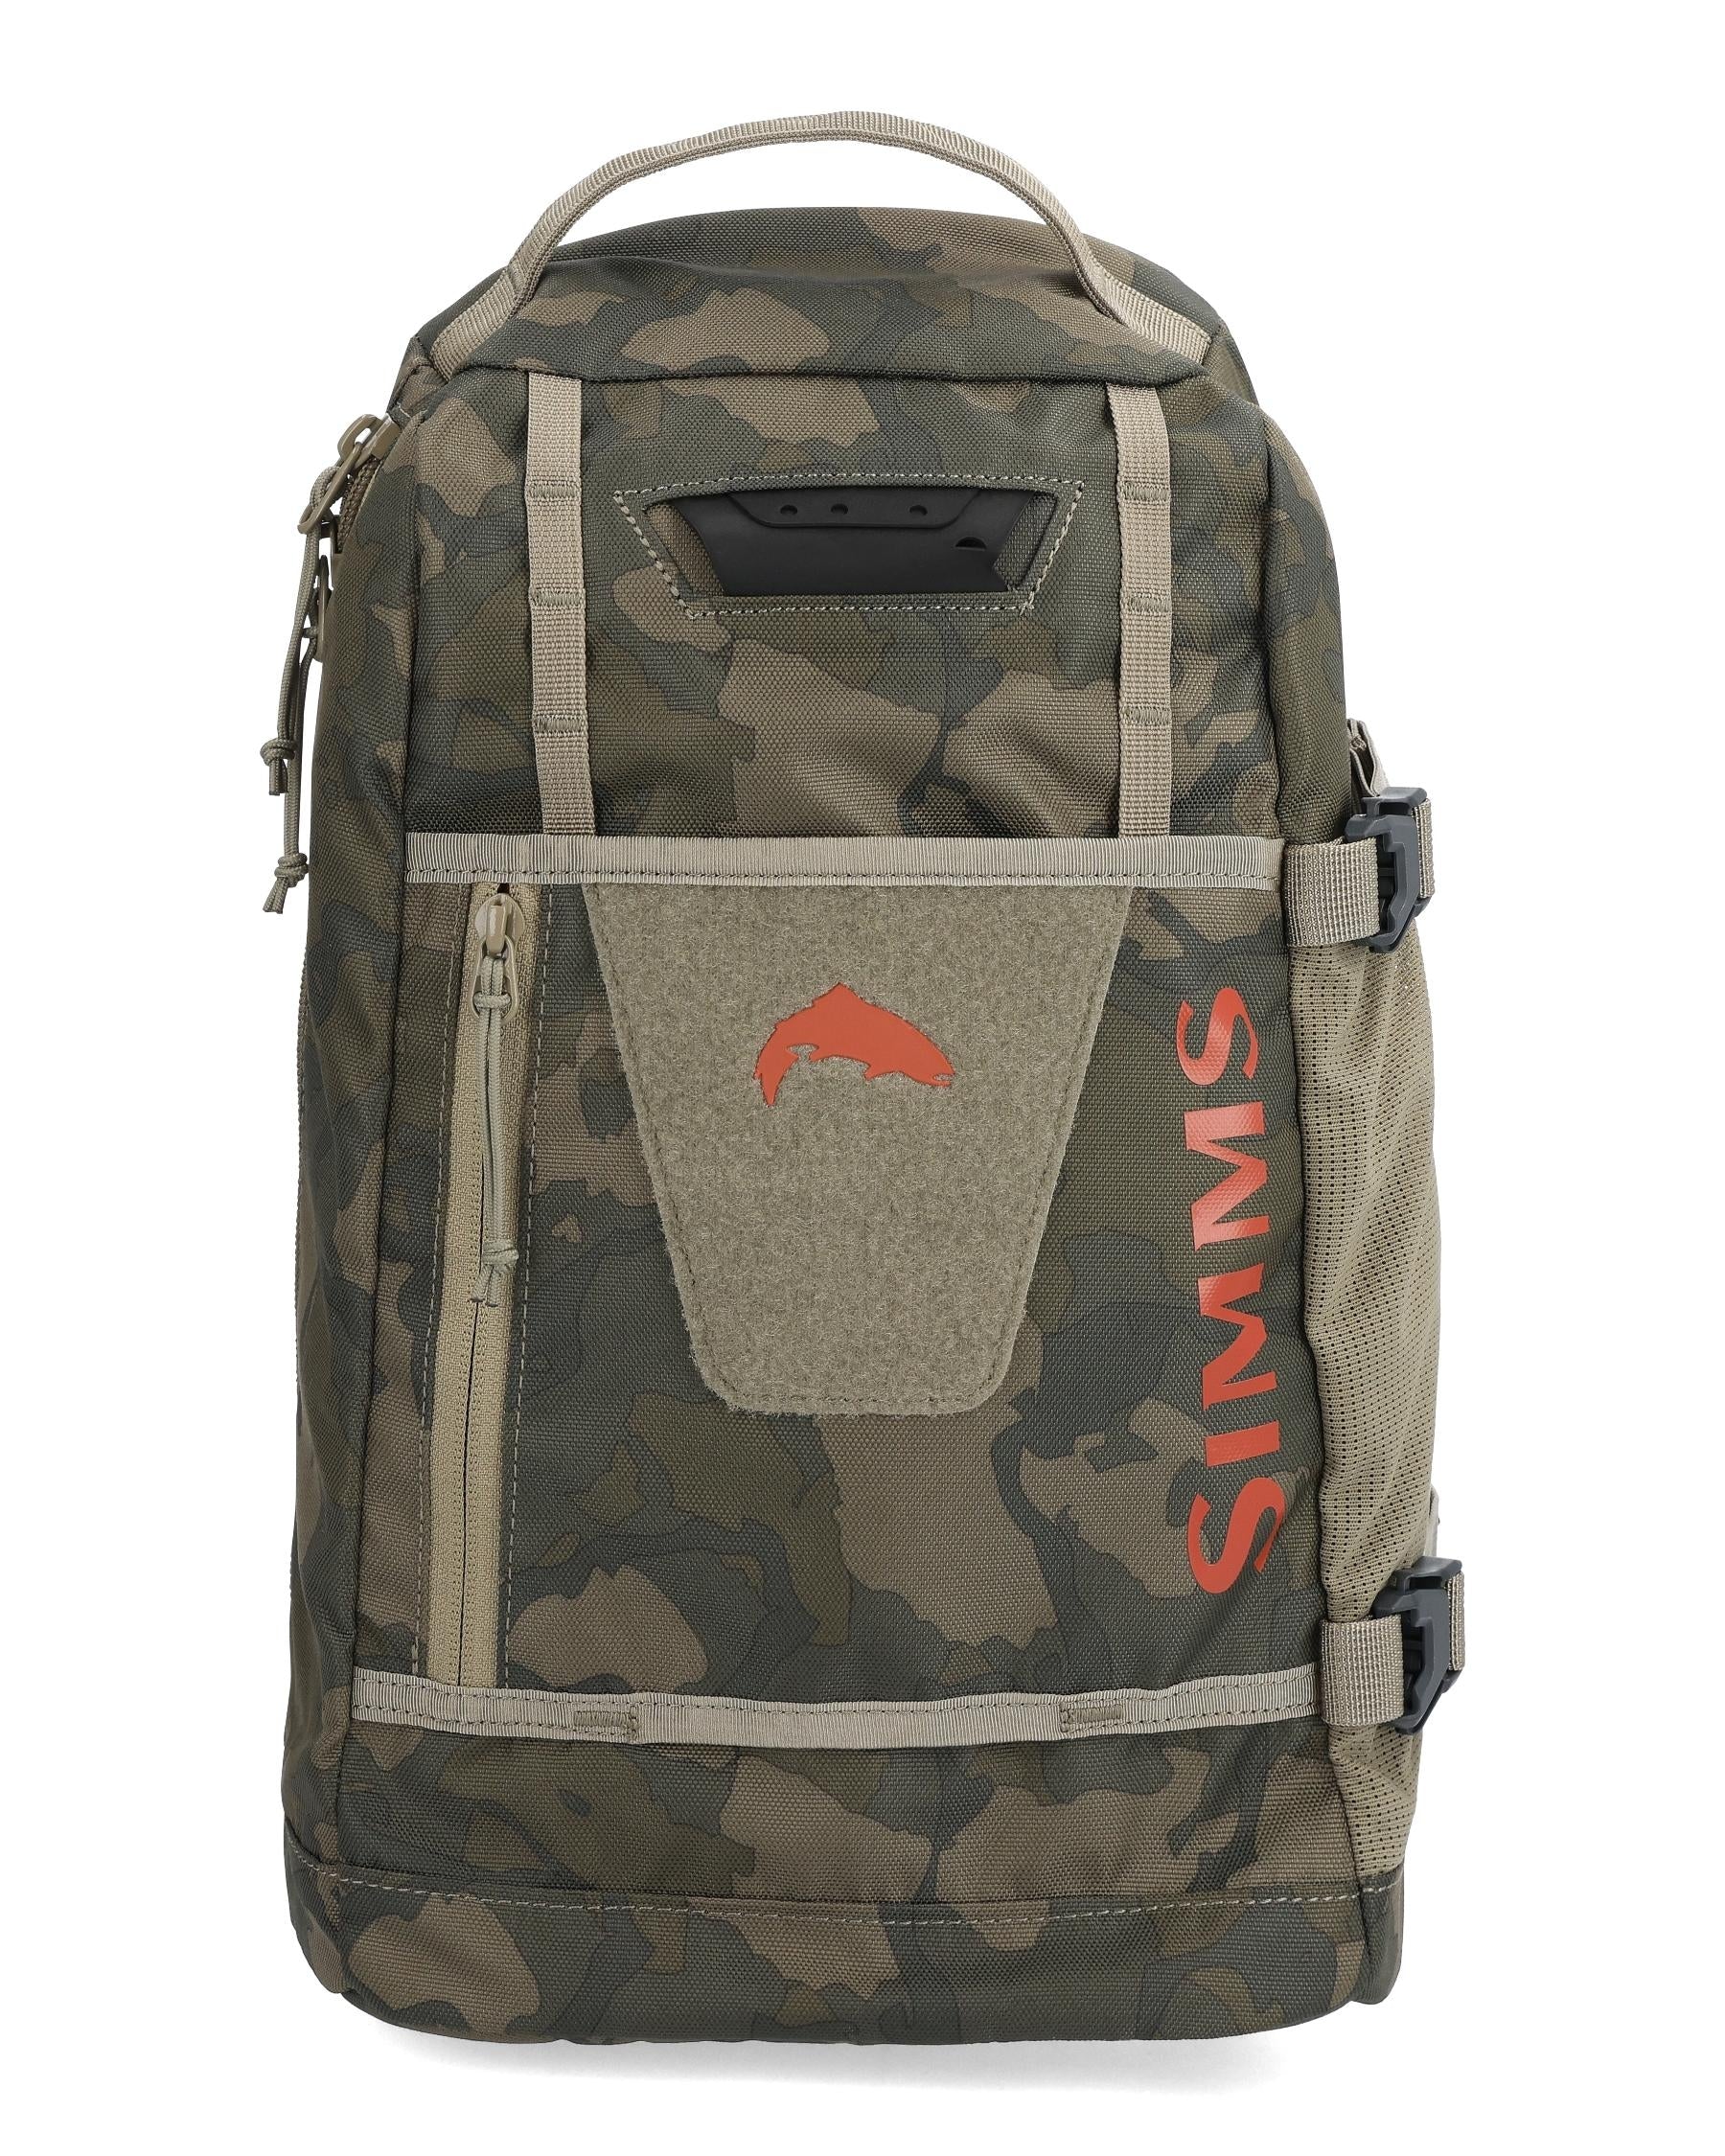 Tributary Sling Pack | Simms Fishing Products